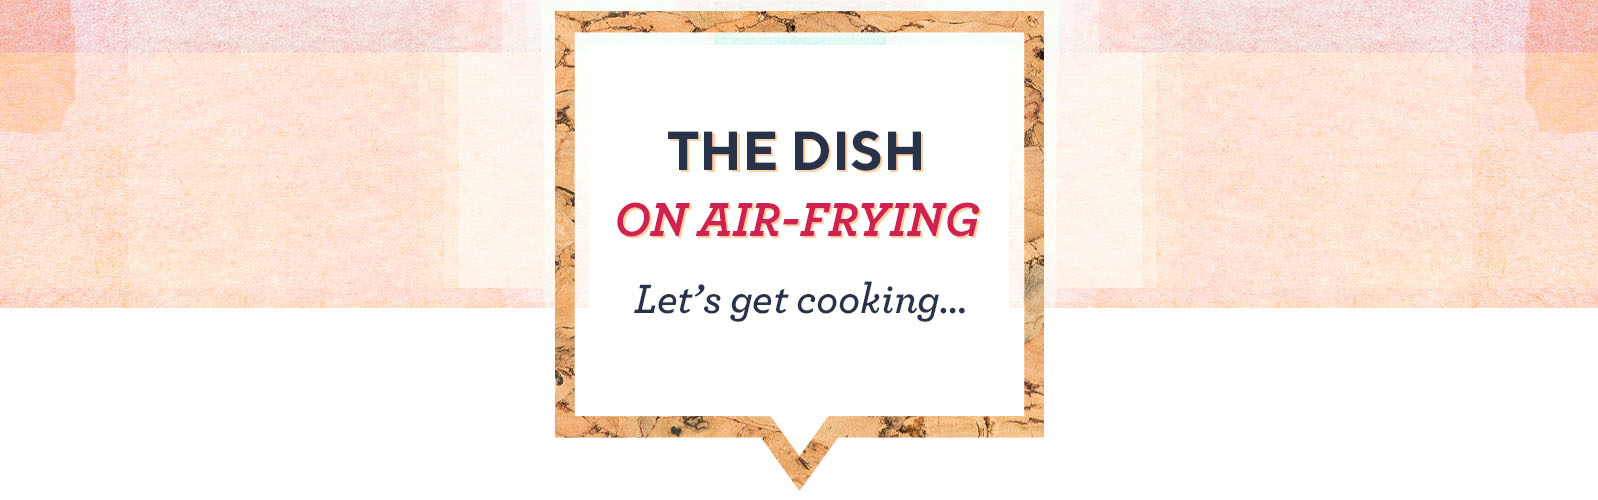 The Dish on Air-Frying.  Let's get cooking…